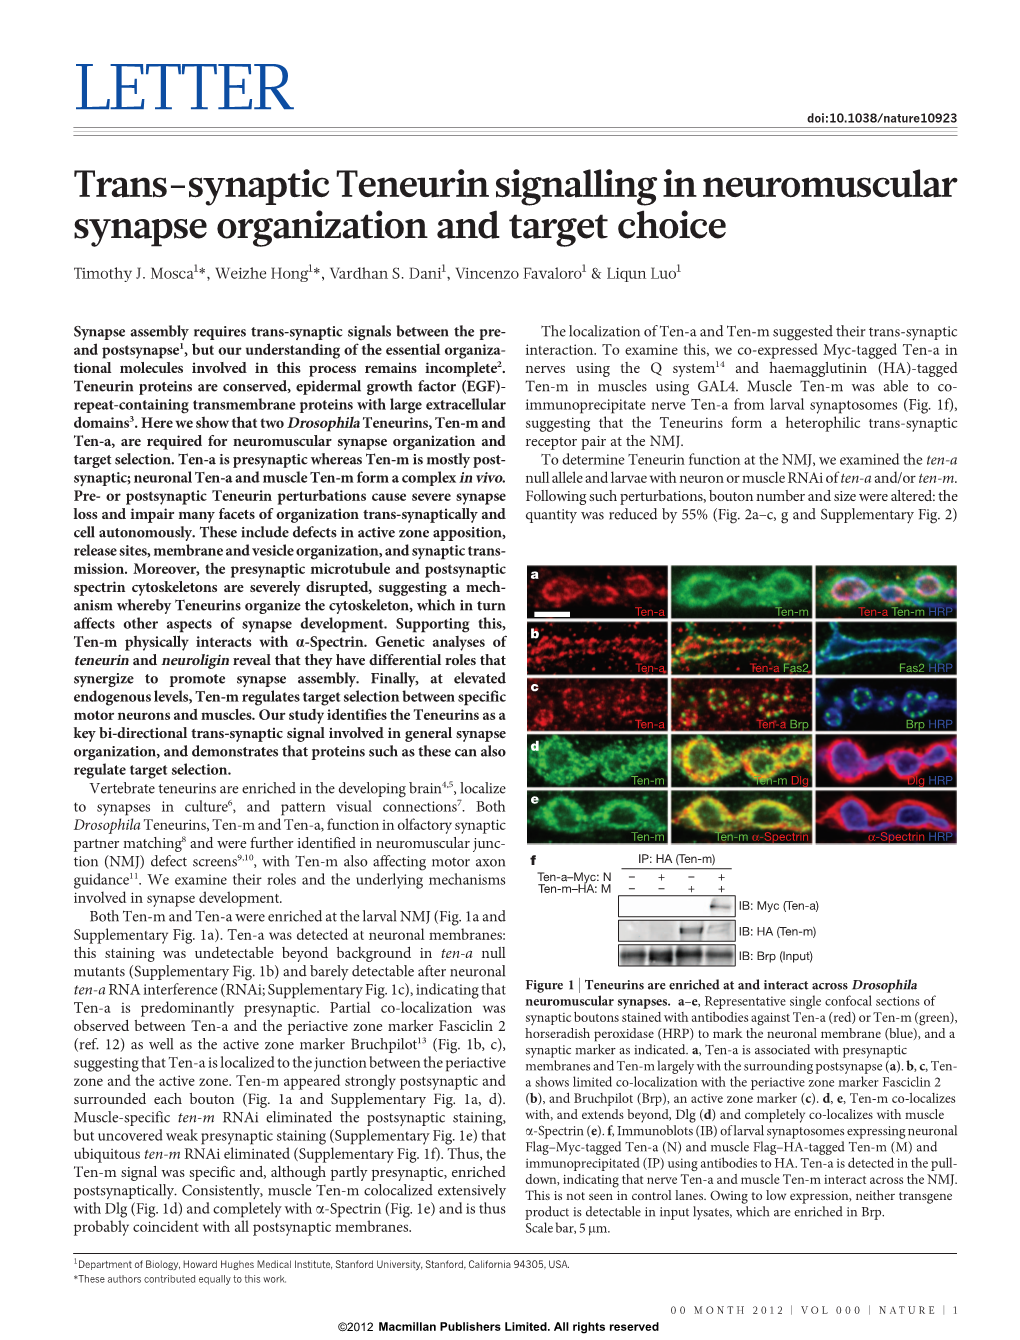 Trans-Synaptic Teneurin Signalling in Neuromuscular Synapse Organization and Target Choice